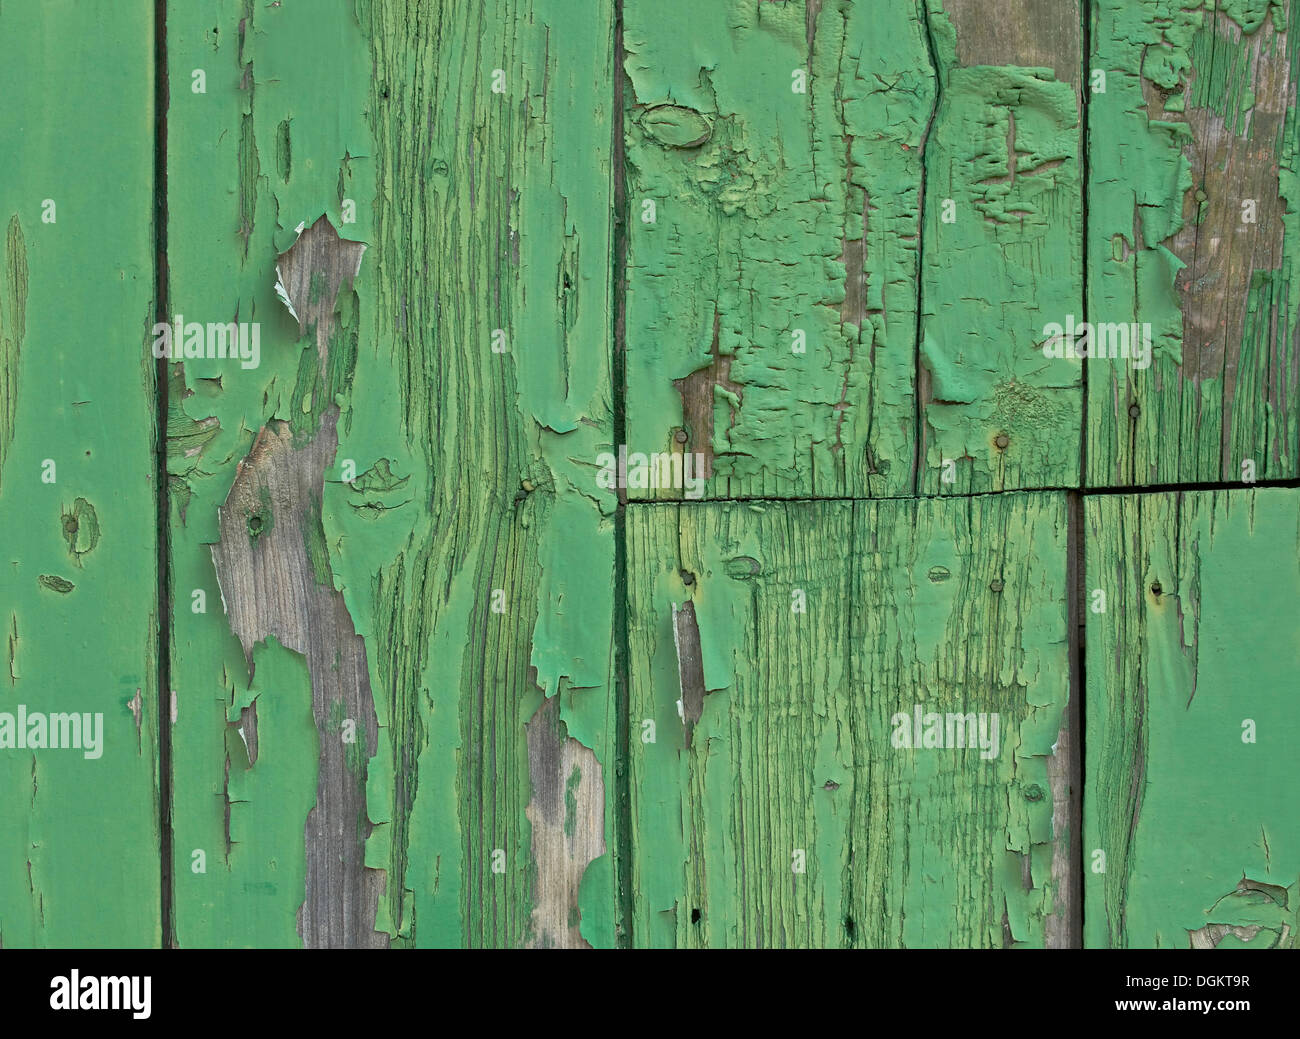 Weathered wooden wall with green paint, background Stock Photo